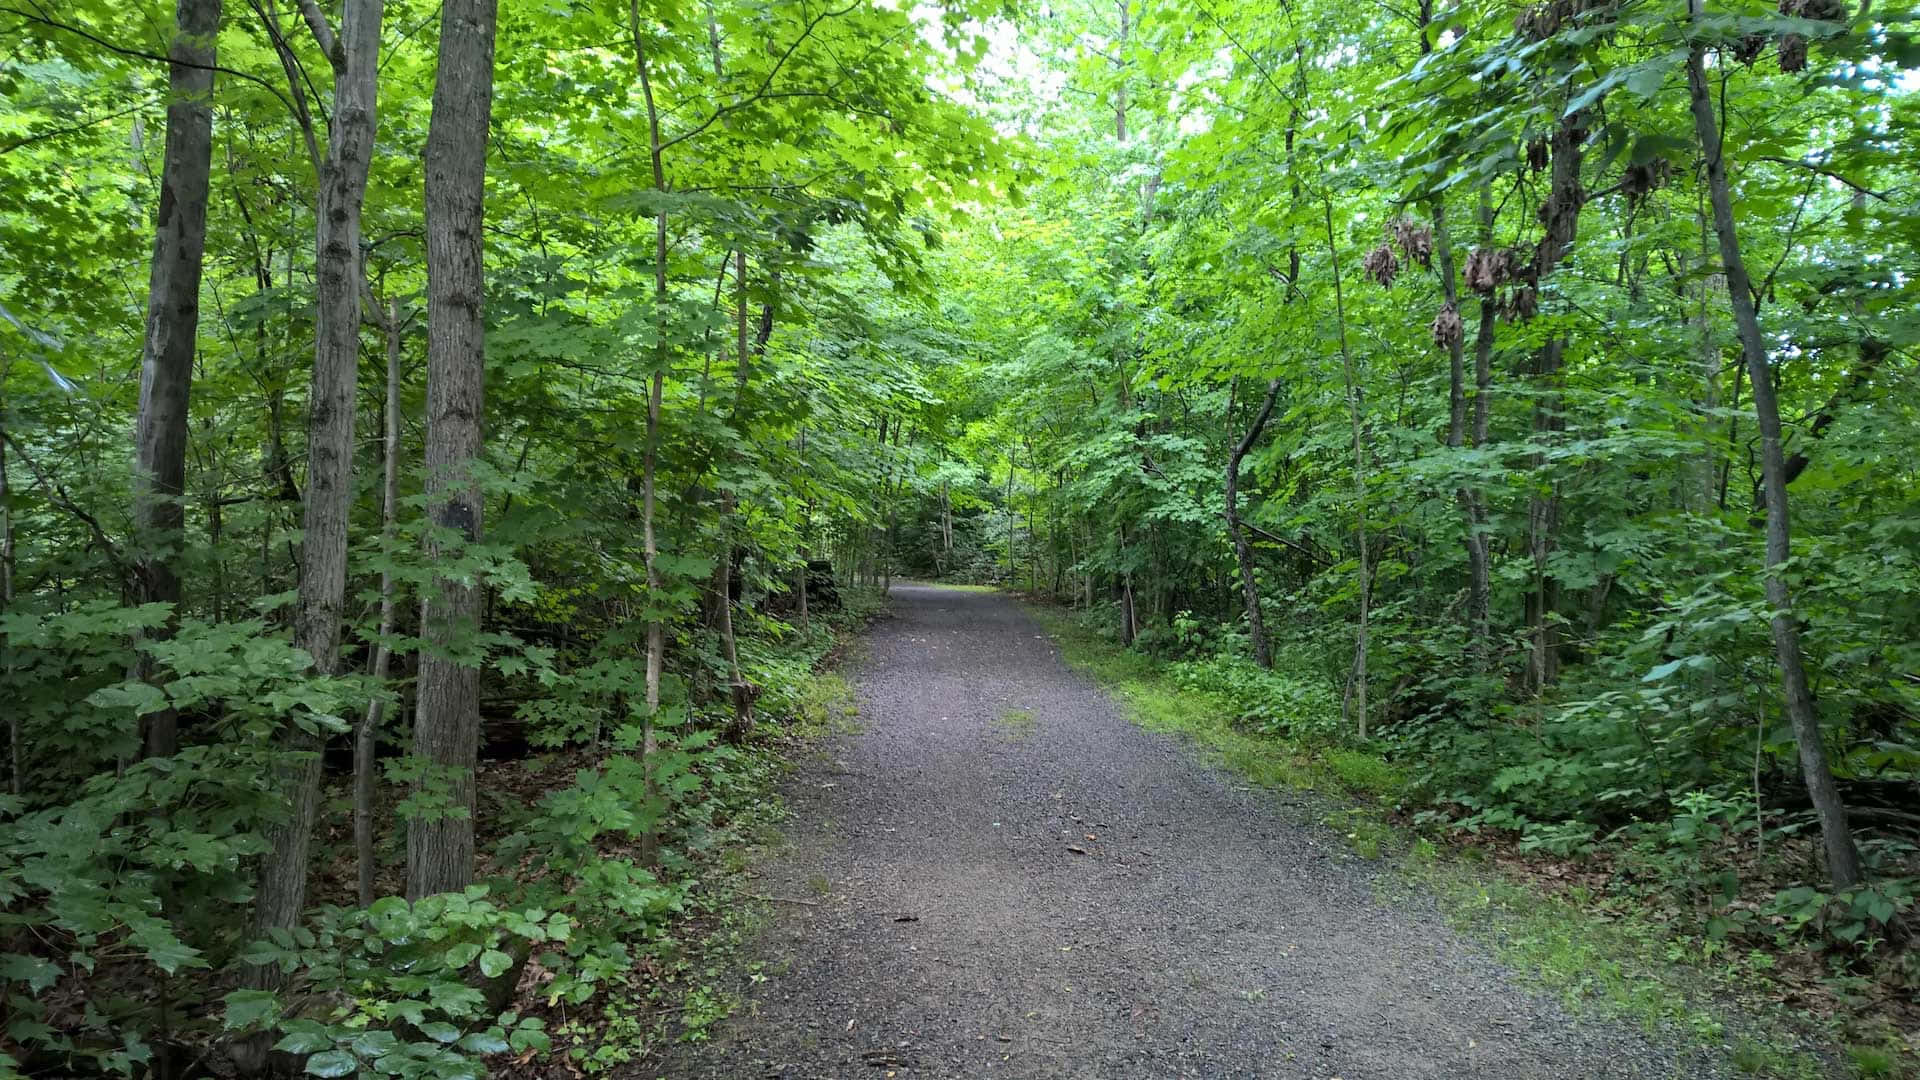 A Dirt Path Surrounded By Green Trees